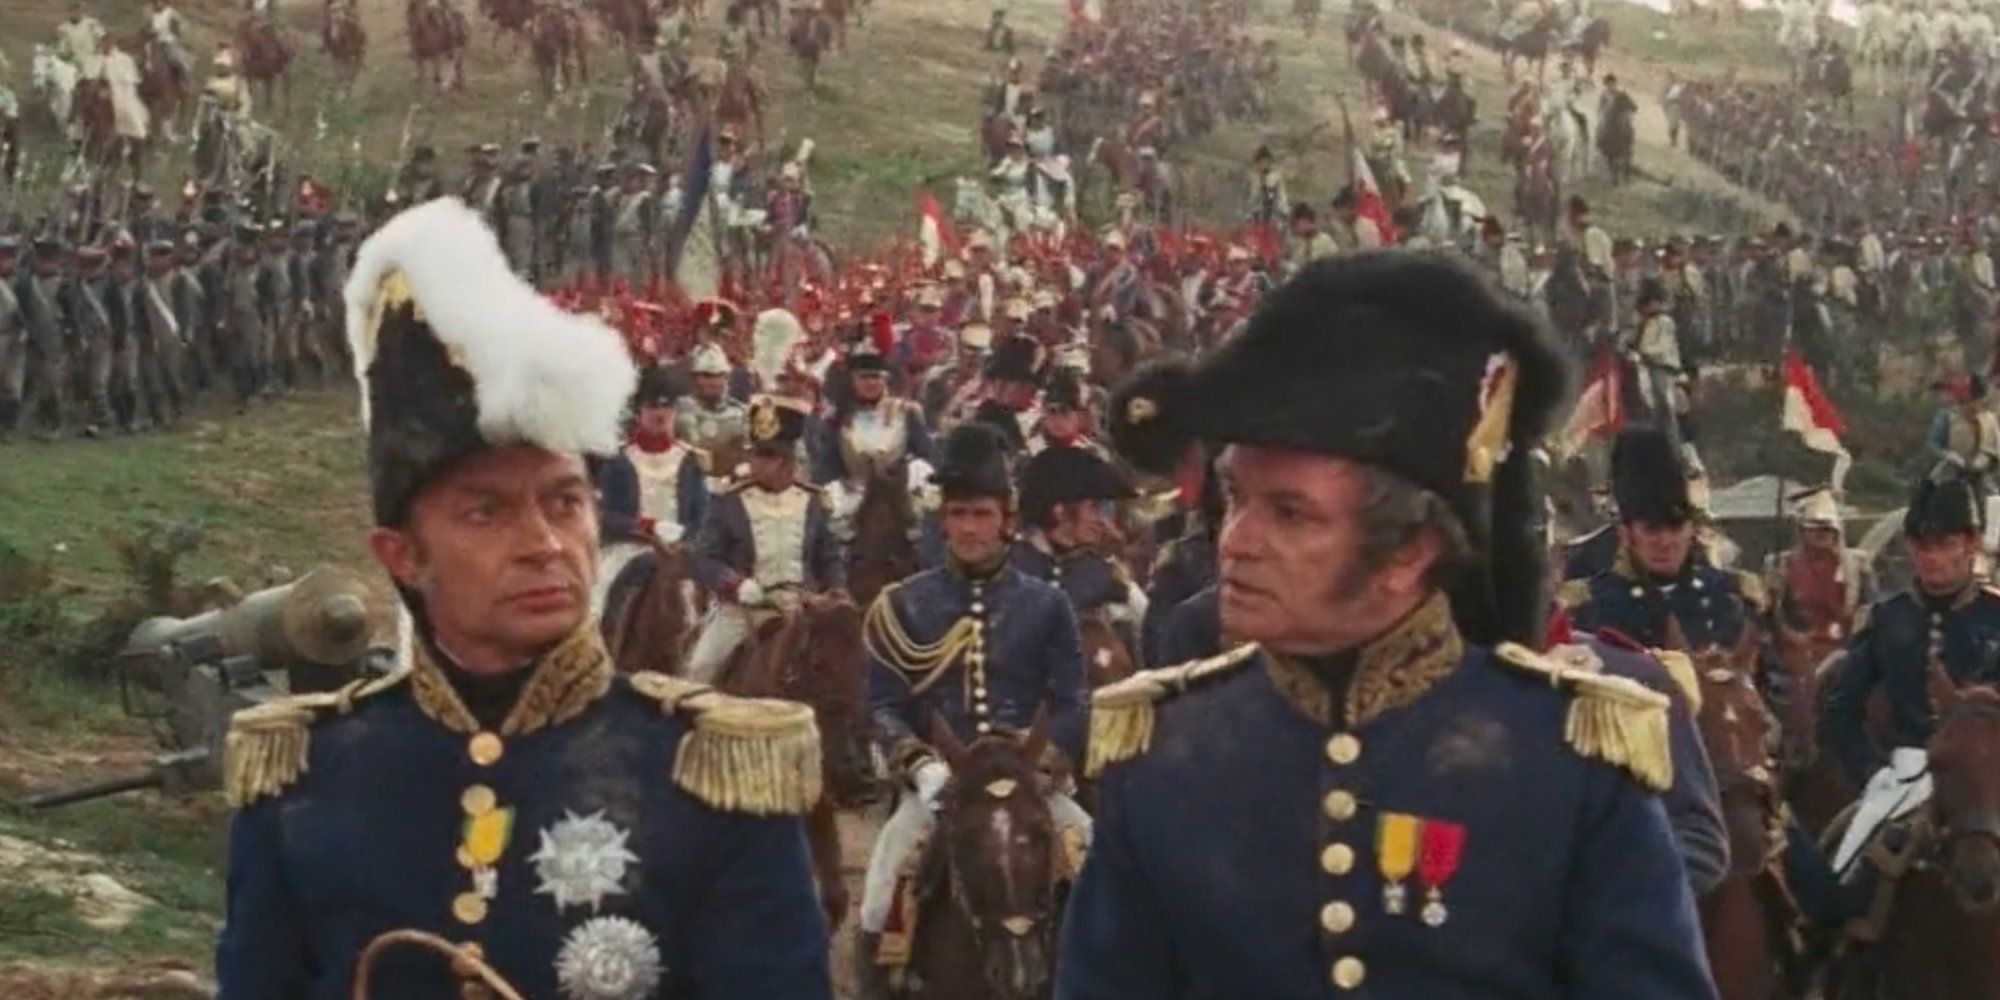 8 Napoleon Movies You Should Watch After Ridley Scott's $220 Million Failure